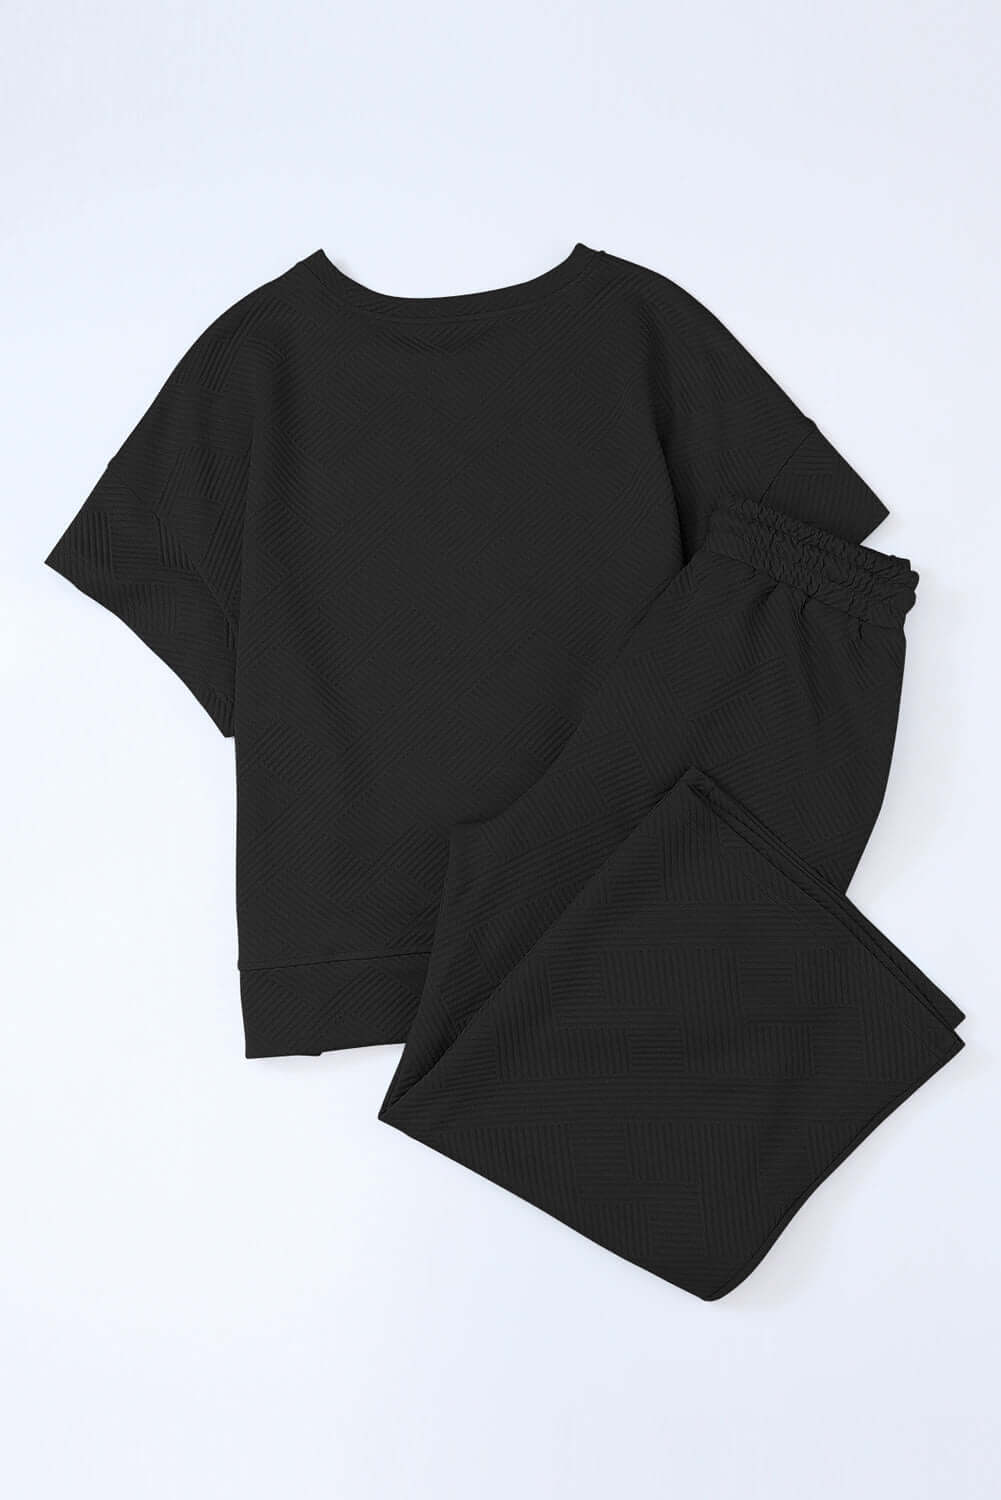 Black Textured Loose Fit T Shirt and Drawstring Pants Set - Dixie Hike & Style